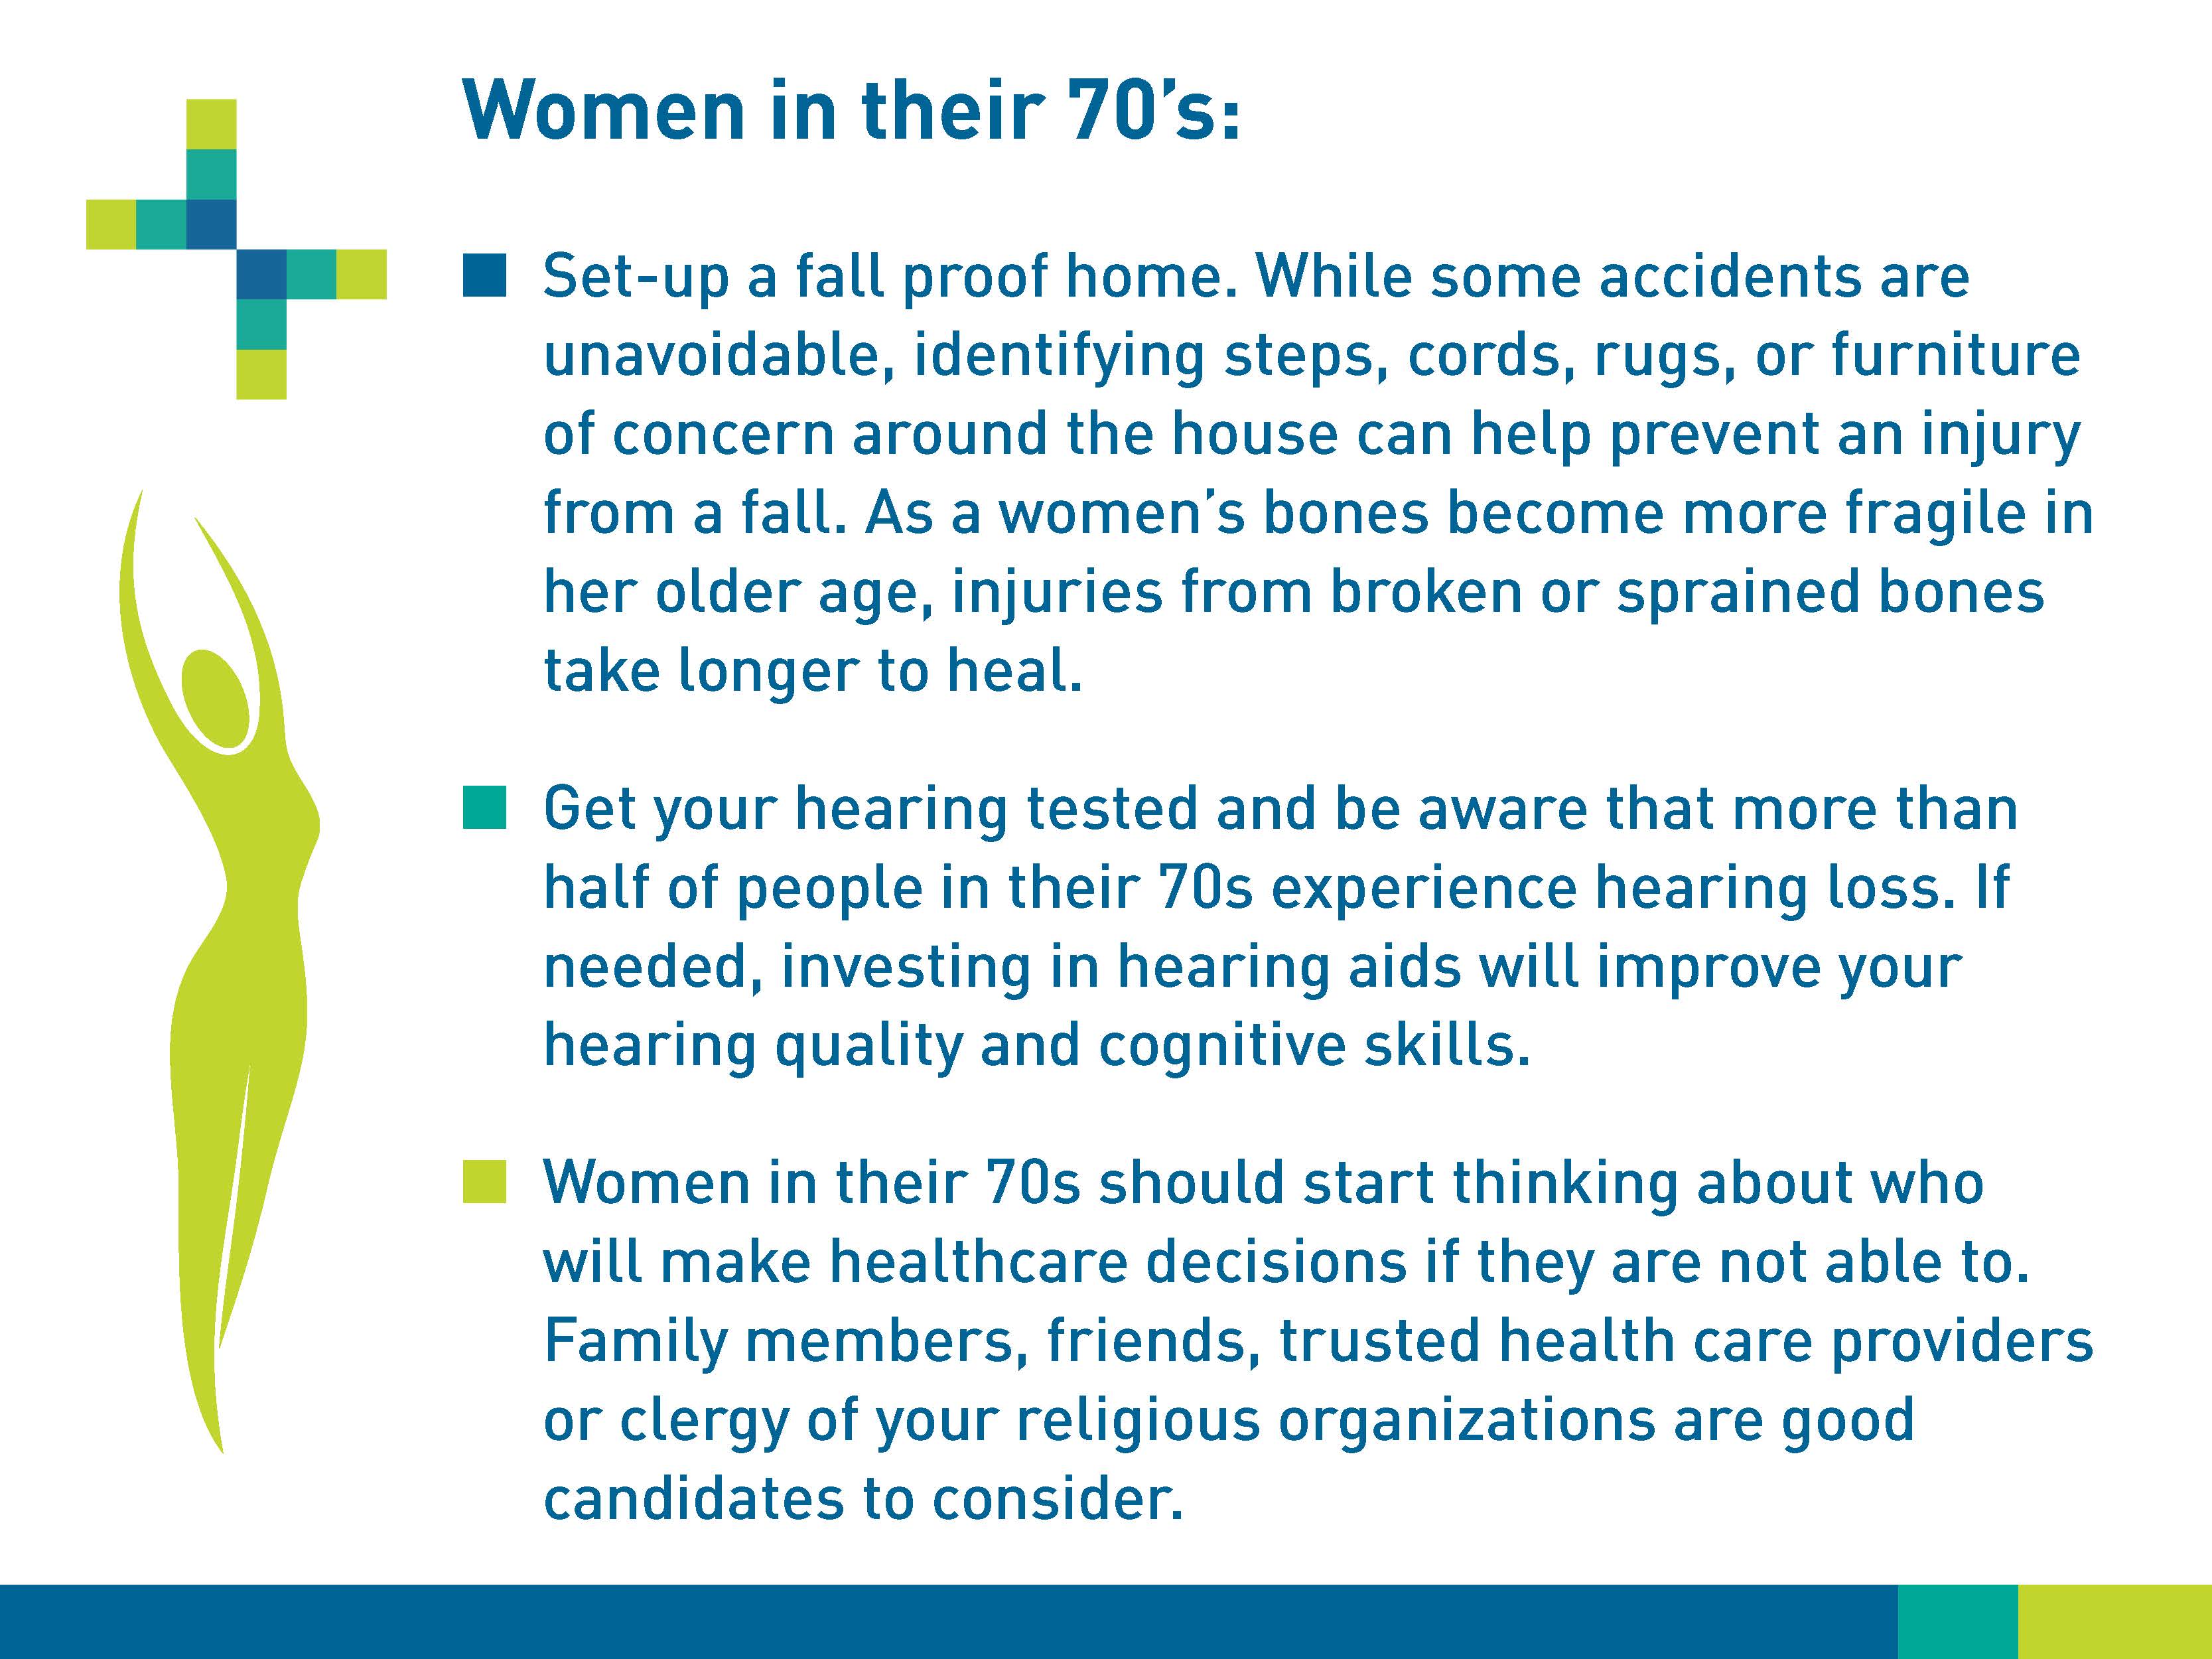 Women in their 70s: Set-up a fall-proof home. While some accidents are unavoidable, identifying steps, cords, rugs, or furniture of concern around the house can help prevent an injury forma  fall. As a woman’s bones become more fragile in her older age, injuries from broken or sprained bones take longer to heal. Get your hearing tested and be aware that more than half of people in their 70s experience hearing loss. If needed, investing in hearing aids will improve your hearing quality and cognitive skills. Women in their 70s should start thinking about who will make healthcare decisions if they are not able to. Family members, friends, trusted healthcare providers or clergy of your religious organizations are good candidates to consider.